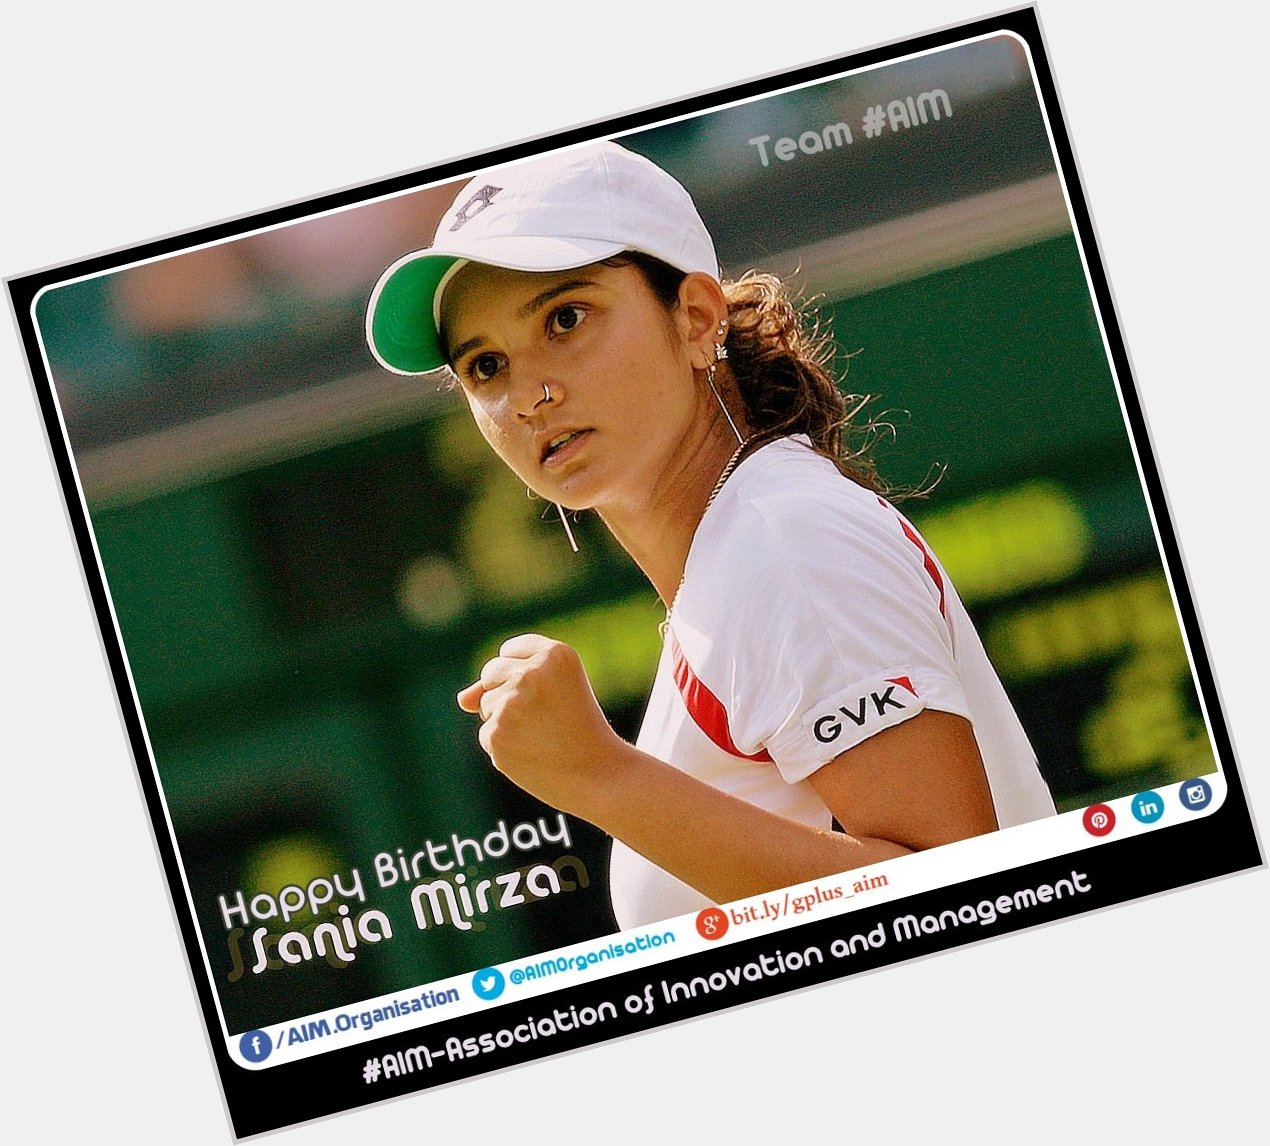 World No. 1 Women\s Doubles Tennis Ace Player Turns 29 Today.
Team wishes a very Happy Birthday. 